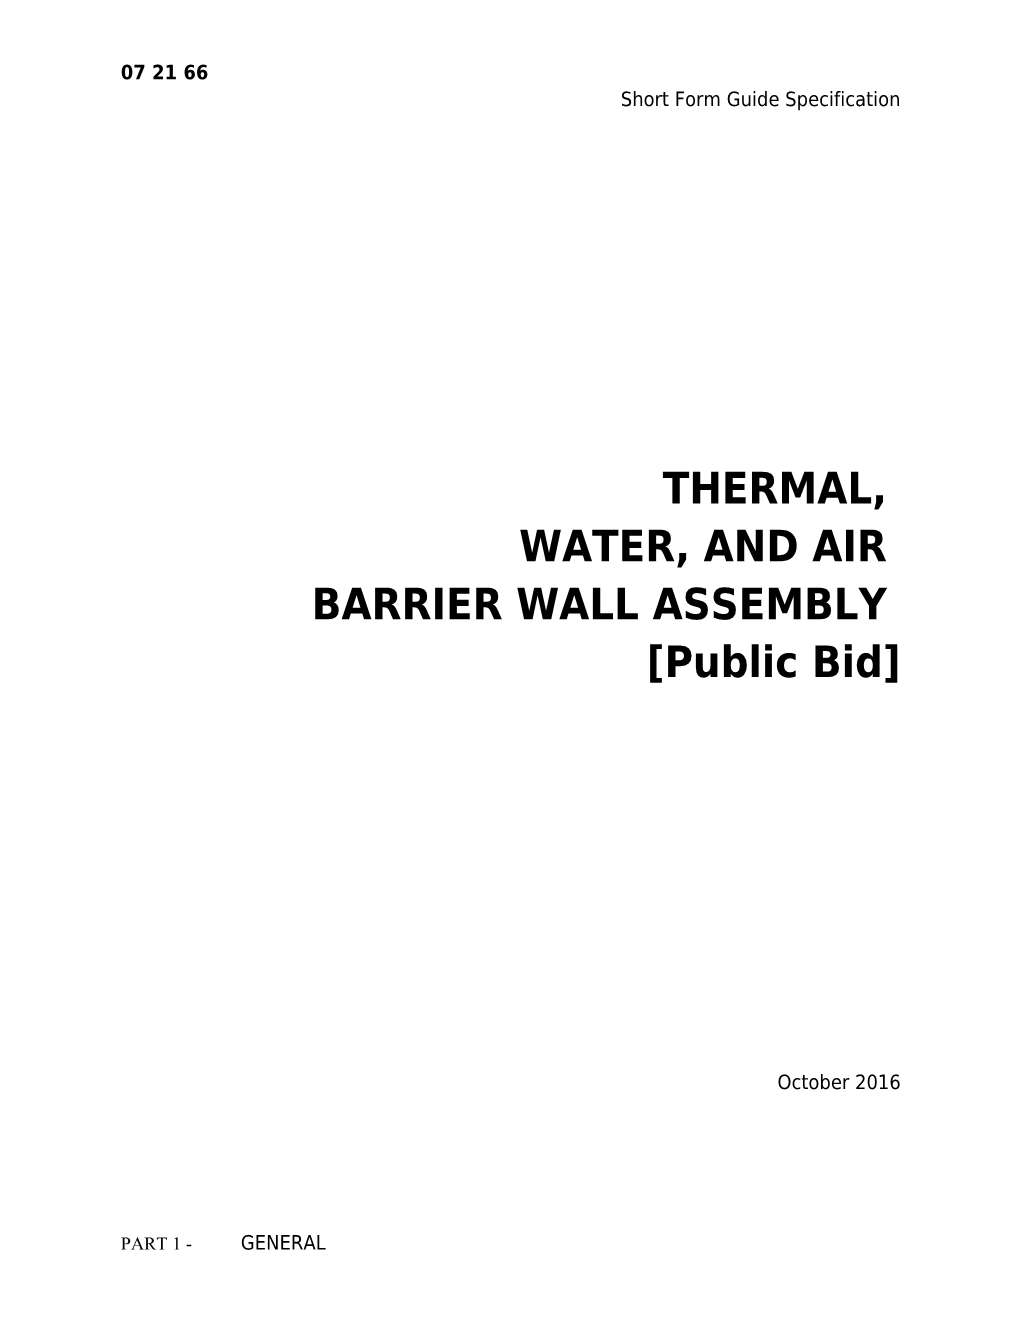 SECTION 072166 THERMAL, WATER, and AIR BARRIER SYSTEM Public Bid